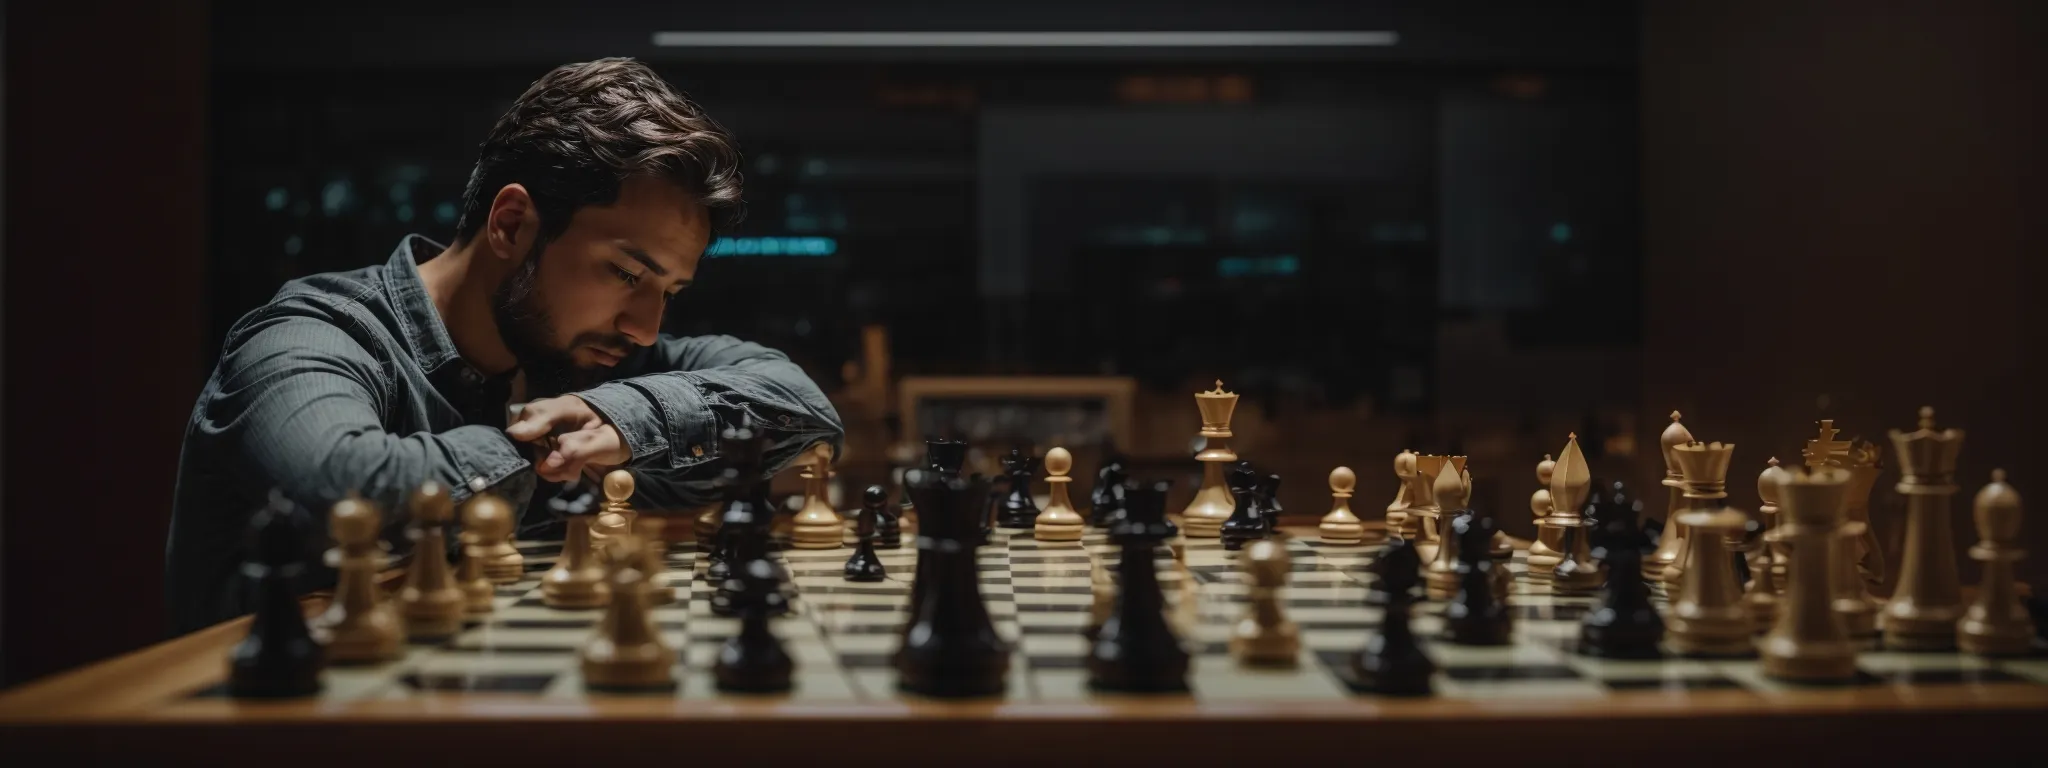 a strategist contemplating a complex chessboard setup to symbolize the tactical use of 'noindex' and 'nofollow' in seo.